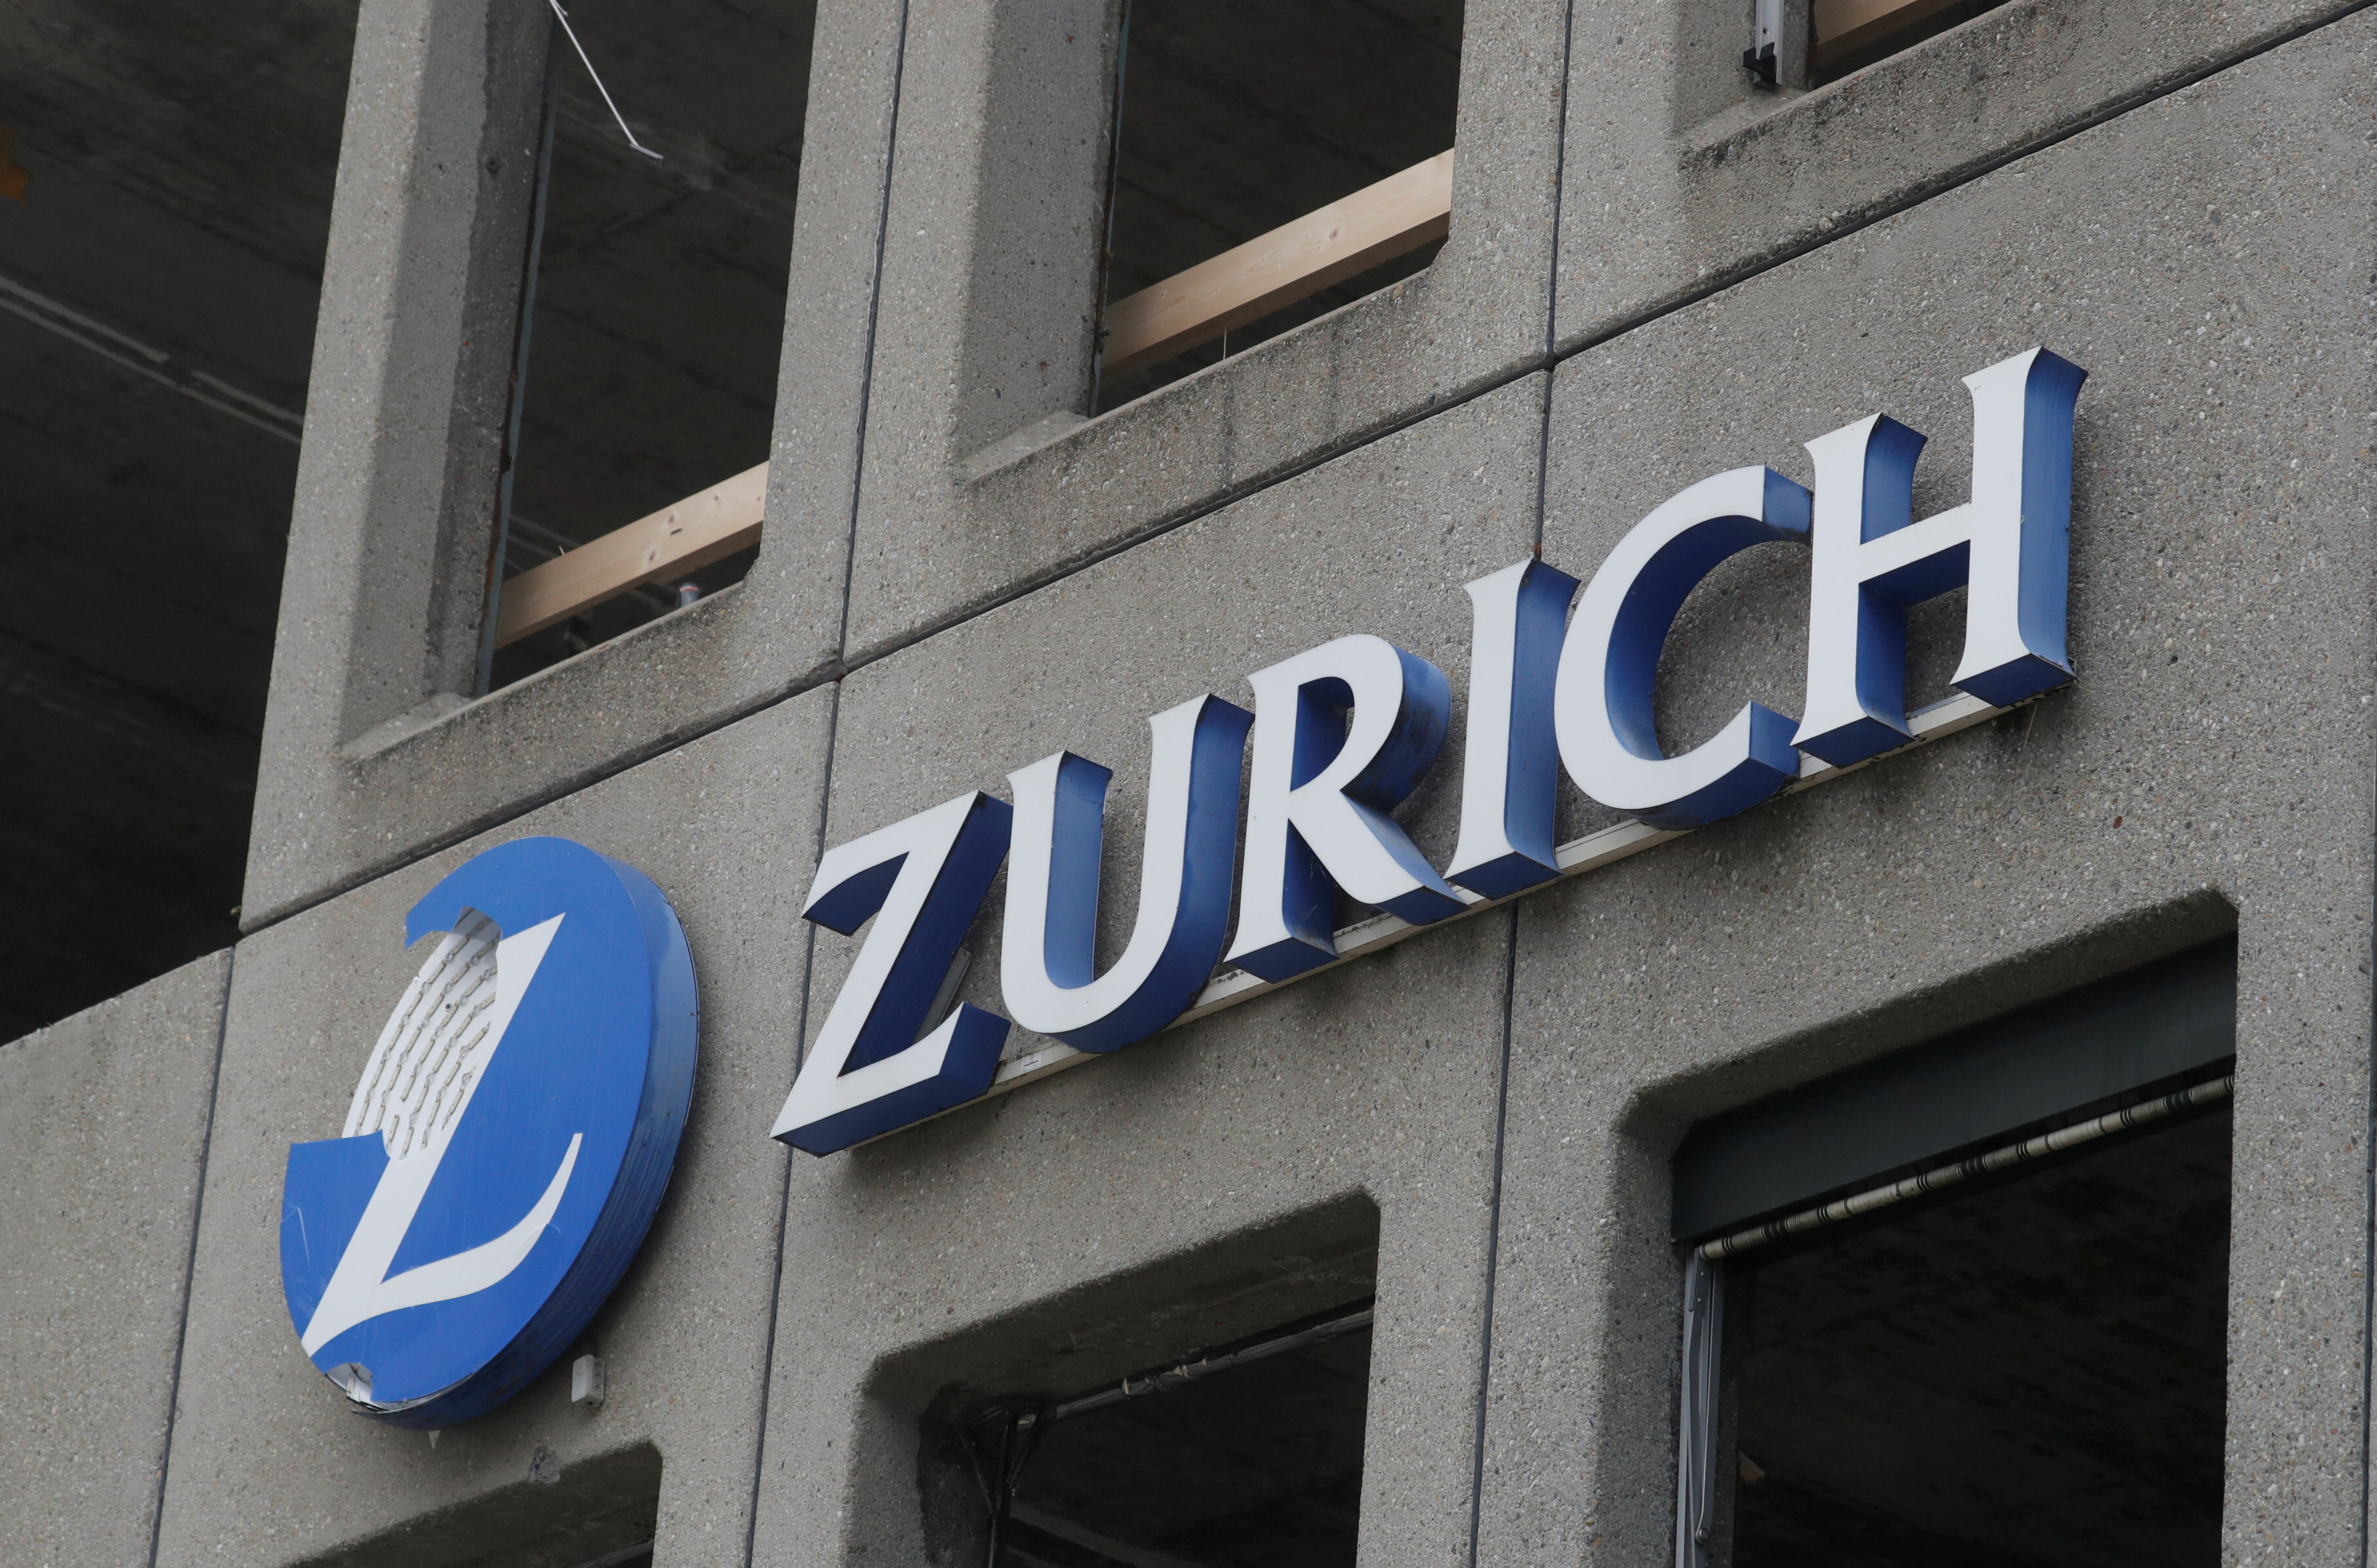 Logo of Zurich Insurance is seen at a former office building in Zurich